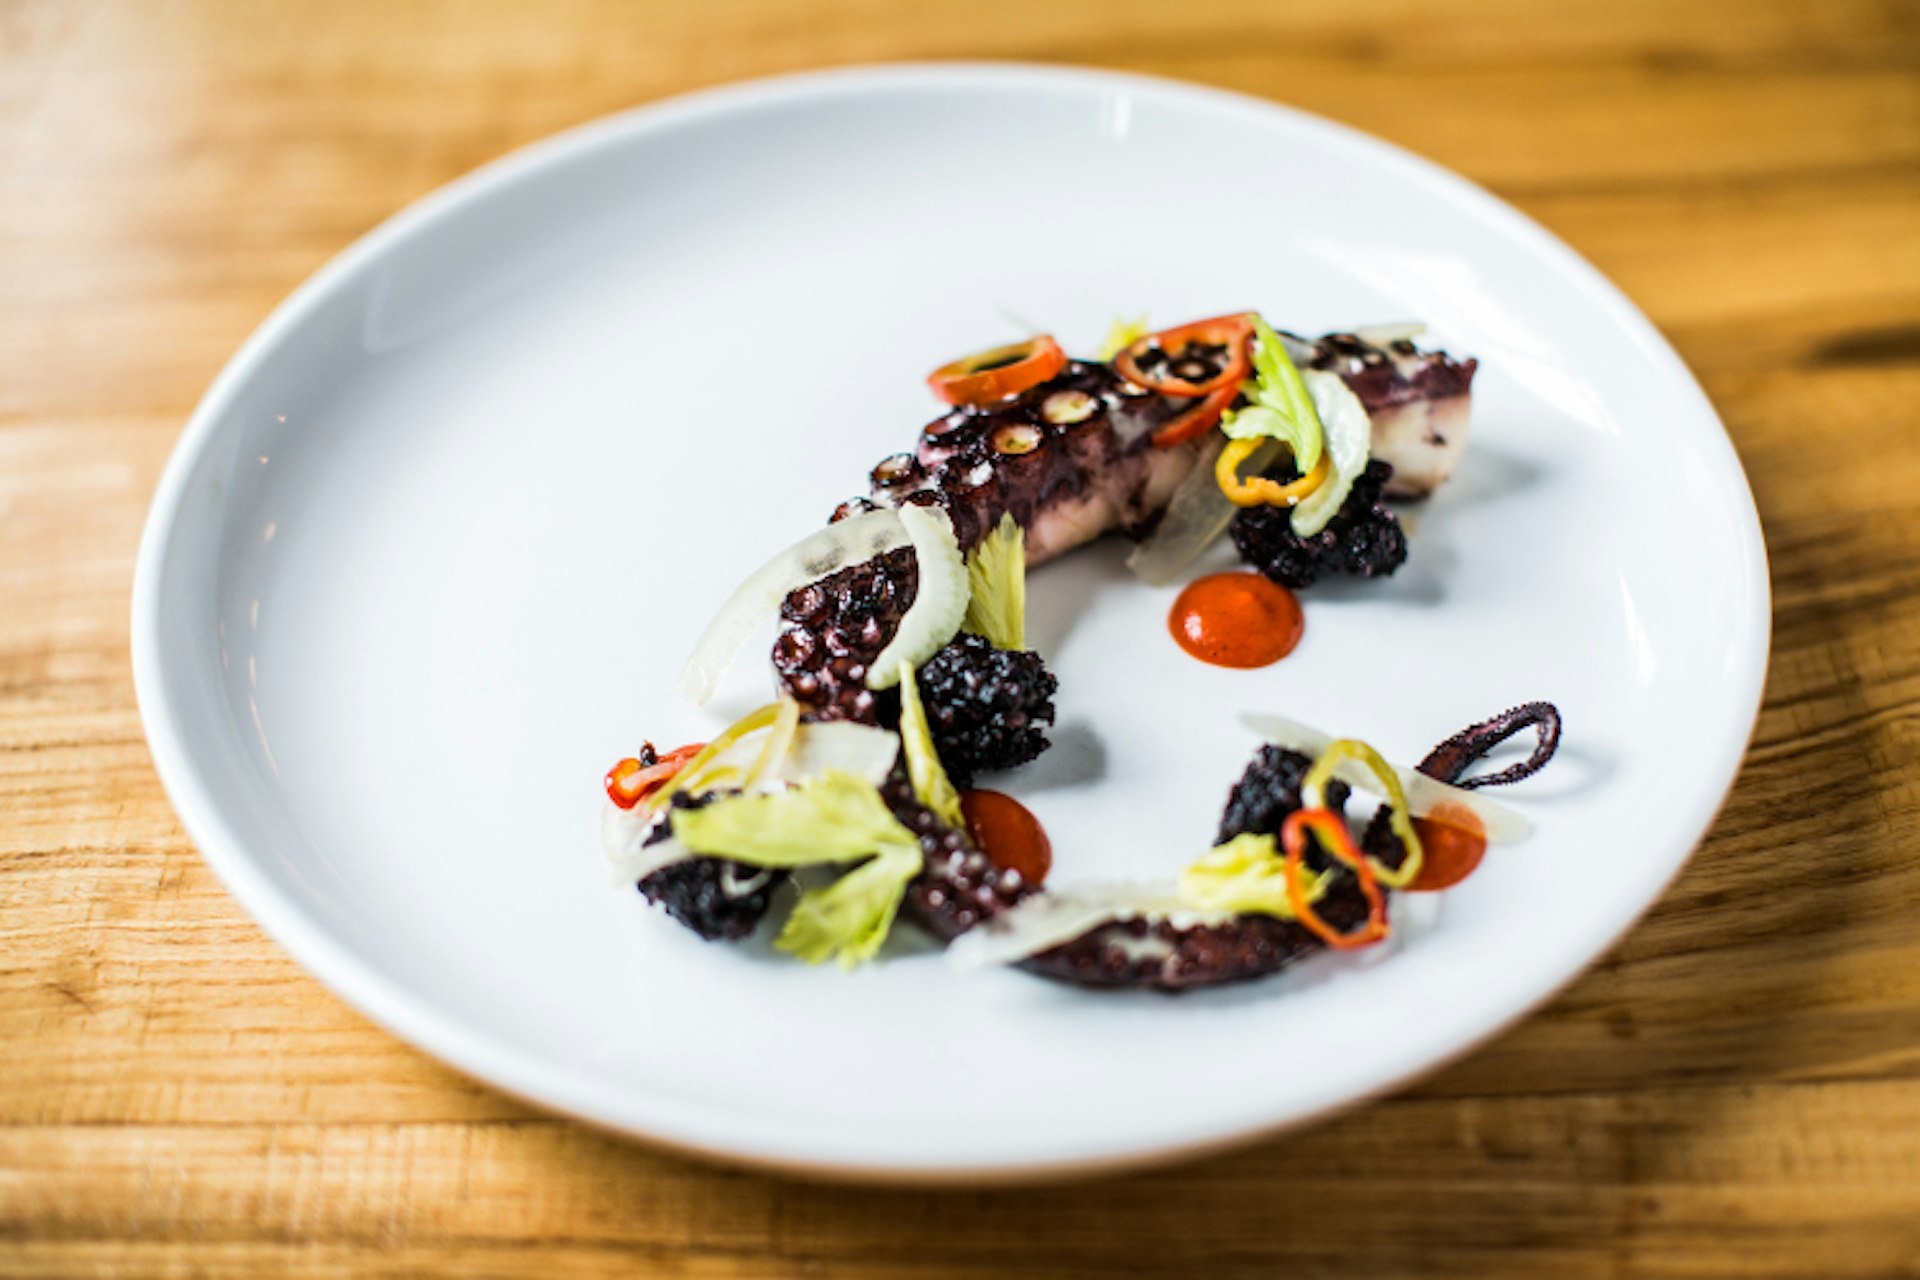 Octopus, hominy, tomatillo, radish and lime at Rolf and Daughters. Image by Andea Behrends / courtesy of Rolf and Daughters